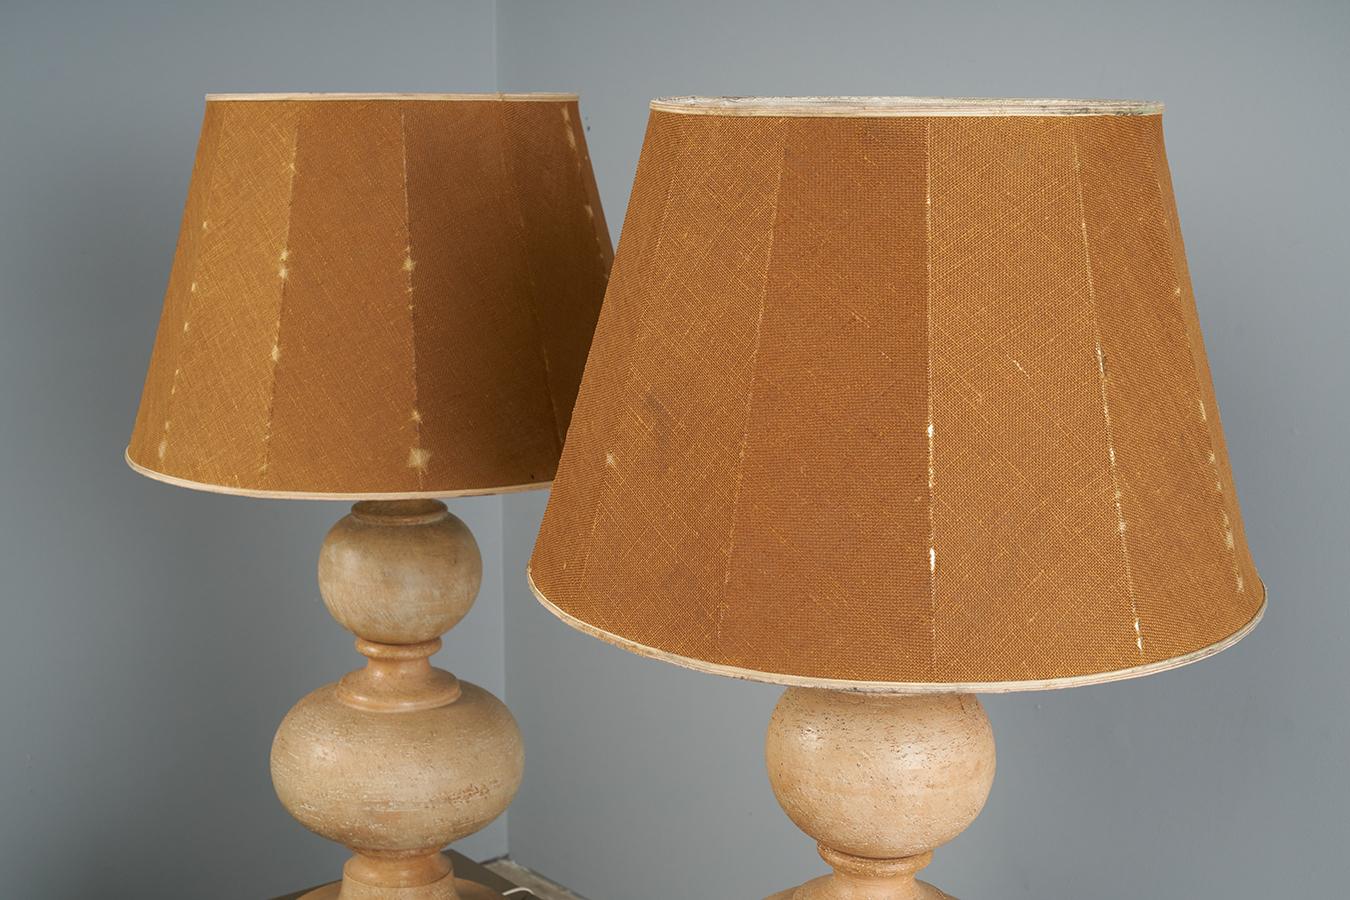 Monumental Pair of Earthenware Italian Ceramic Lamps by Ugo Zaccagnini  For Sale 1